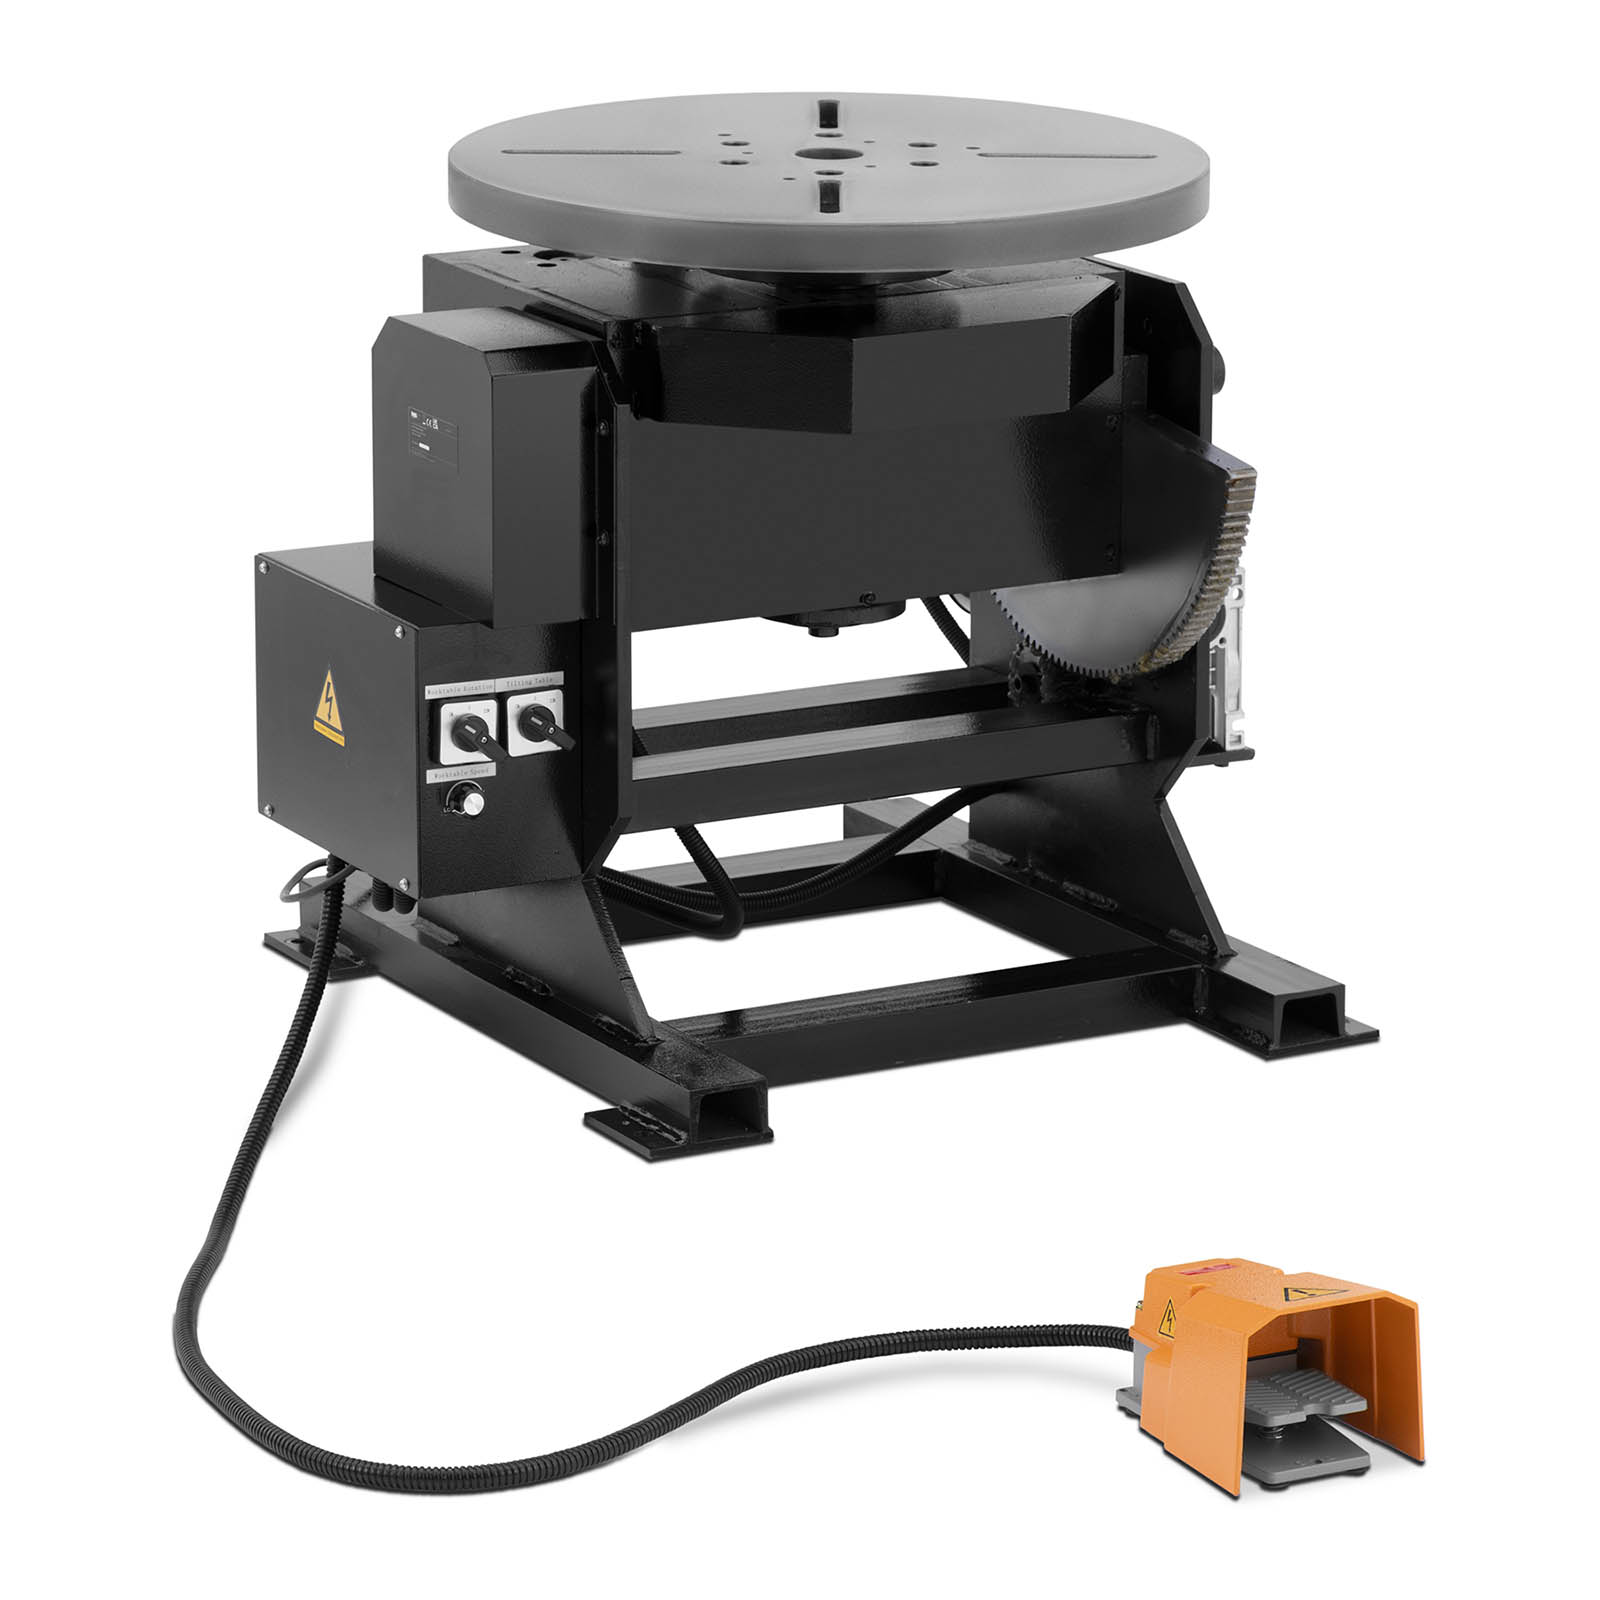 Welding Turntable - 500 kg - table inclination -45° - 90° - foot pedal